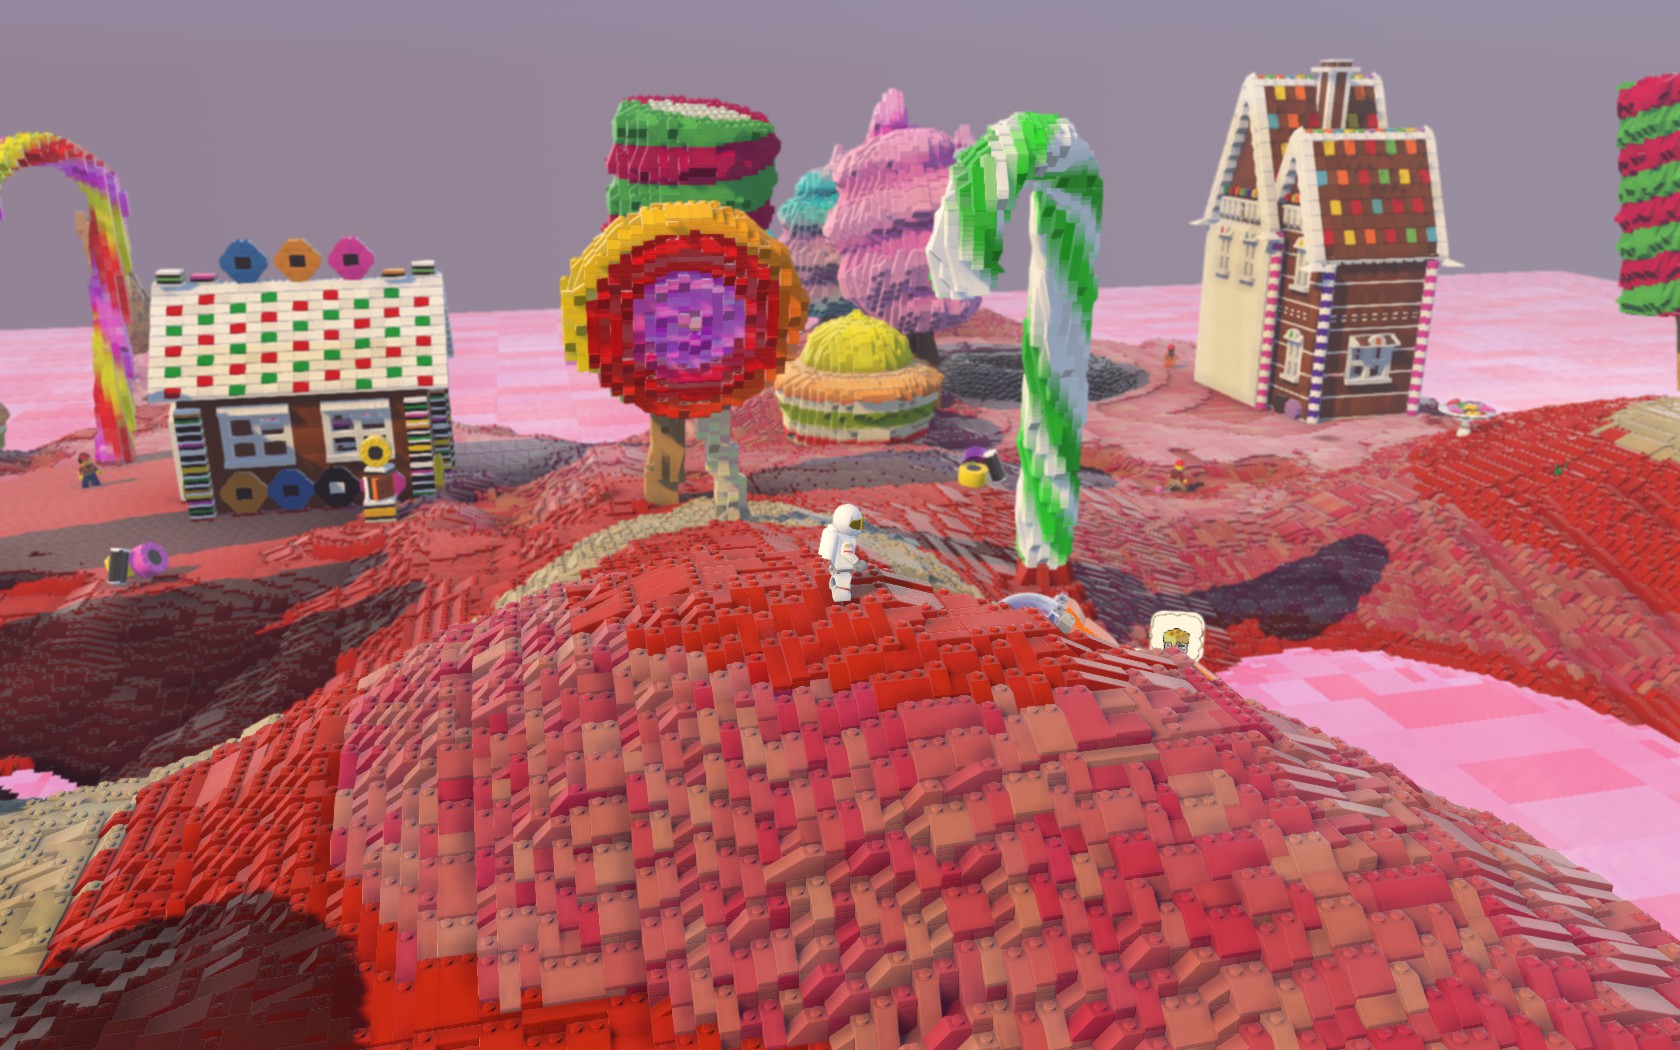 https://static.wikia.nocookie.net/lego-worlds/images/5/55/Candy_Construction_Capers.jpg/revision/latest?cb=20170927024225